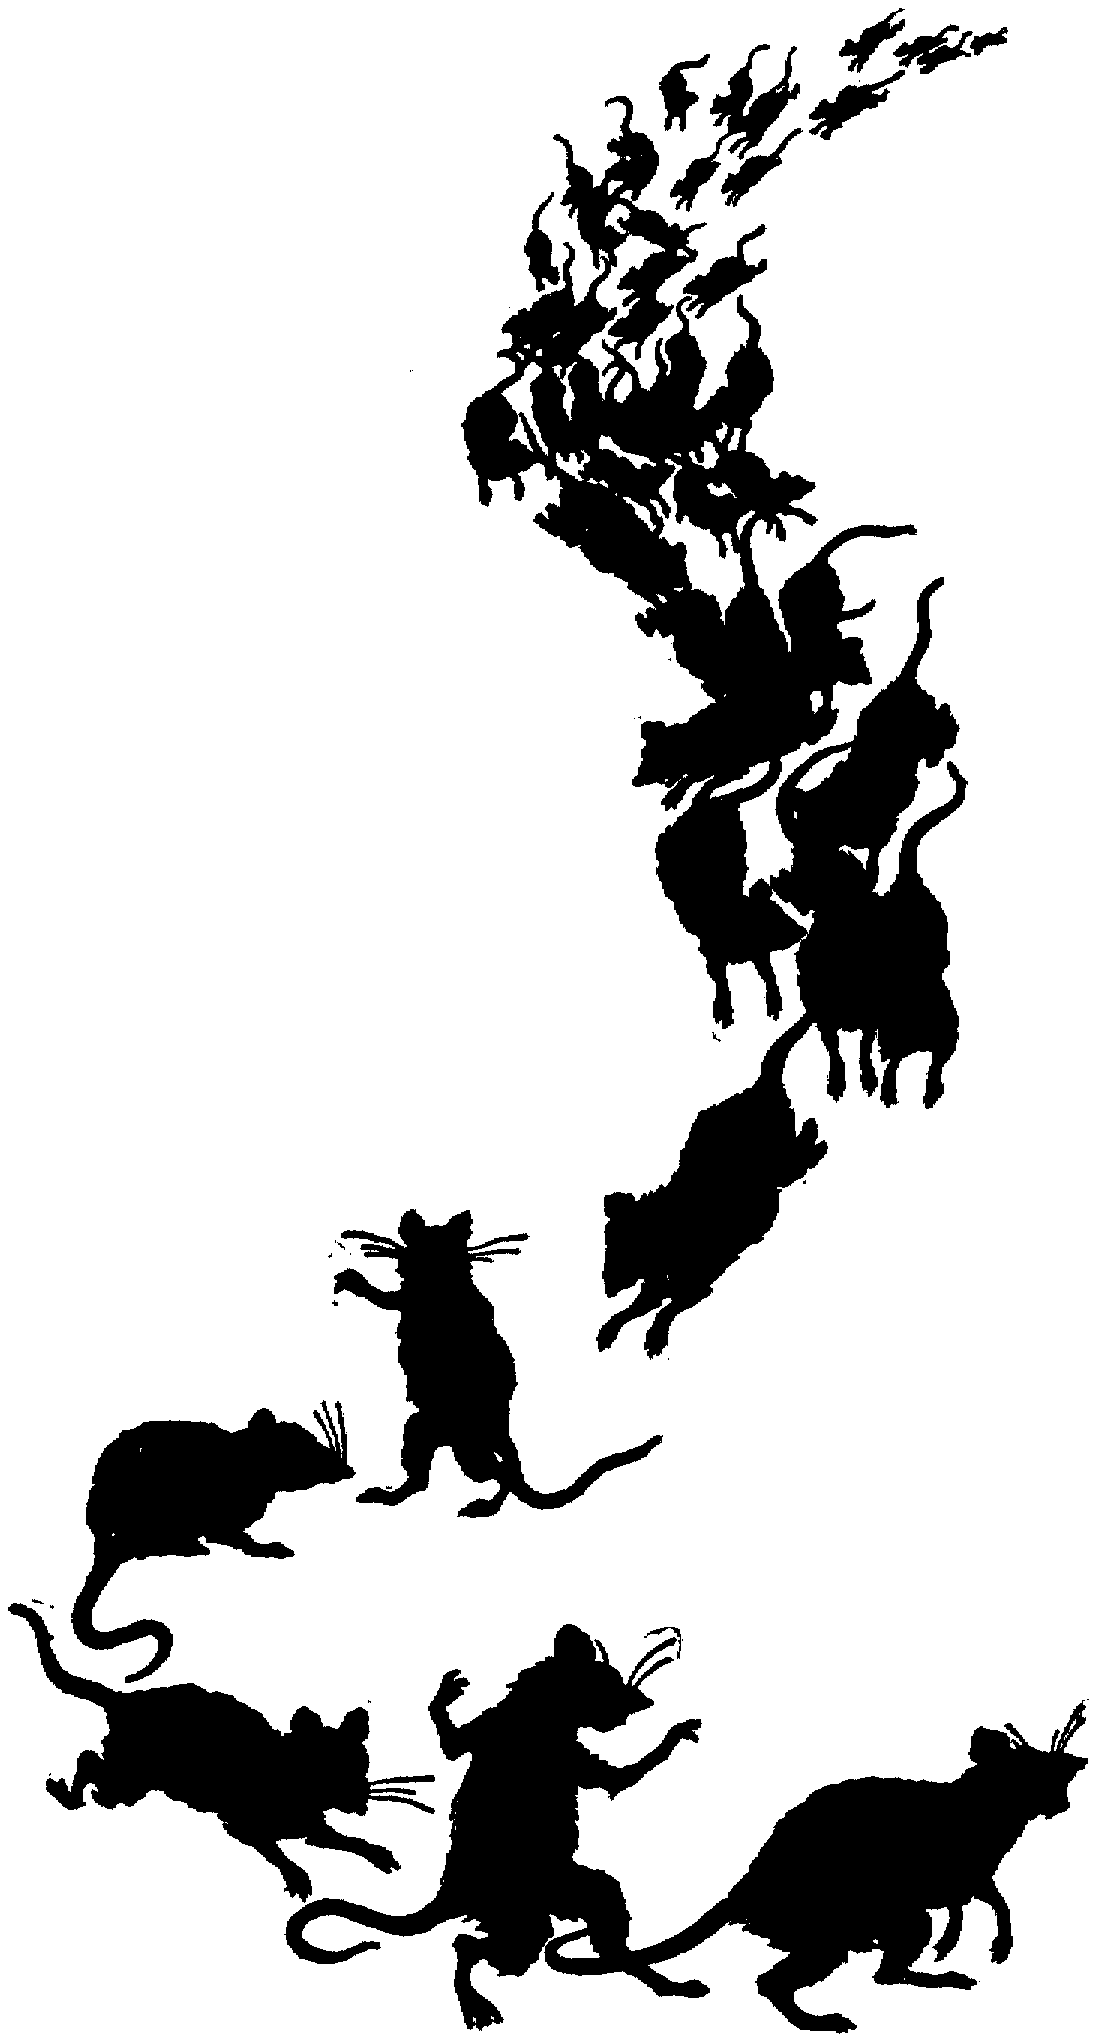 Silhouette of large group of rats on the move, some standing upright